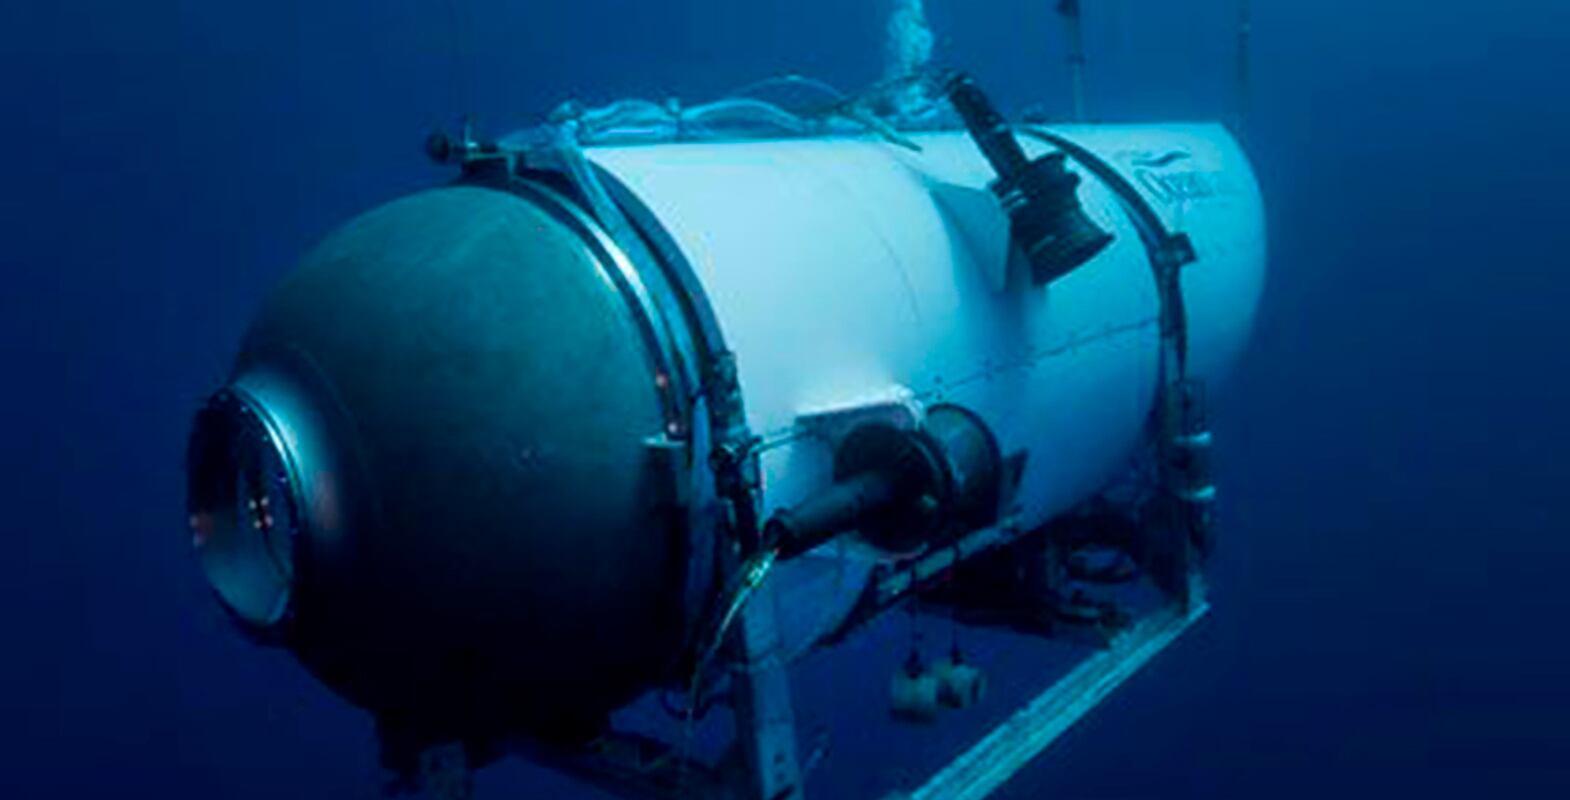 FILE - This undated image provided by OceanGate Expeditions in June 2021 shows the company's Titan submersible.  Rescuers are racing against time to find the missing submersible carrying five people, who were reported overdue Sunday night.  (OceanGate Expeditions via AP, File)